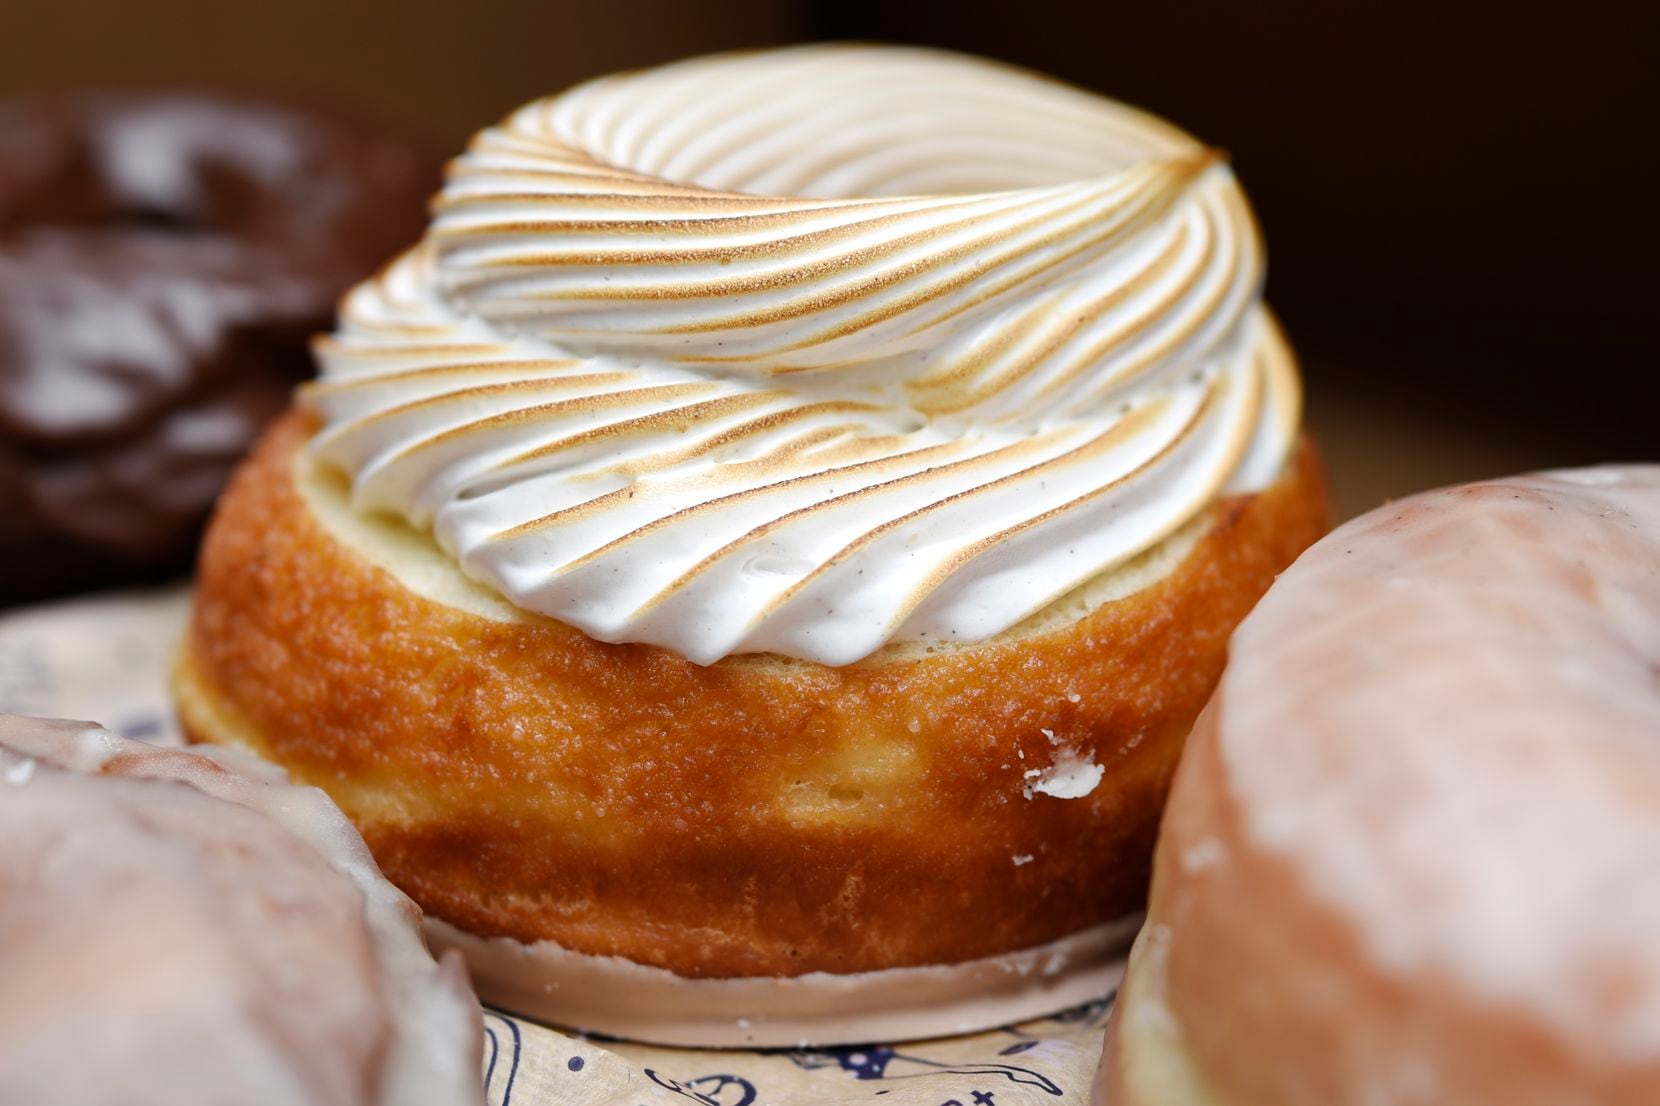 The horchata doughnut is one of the Salty Donut's specialties.